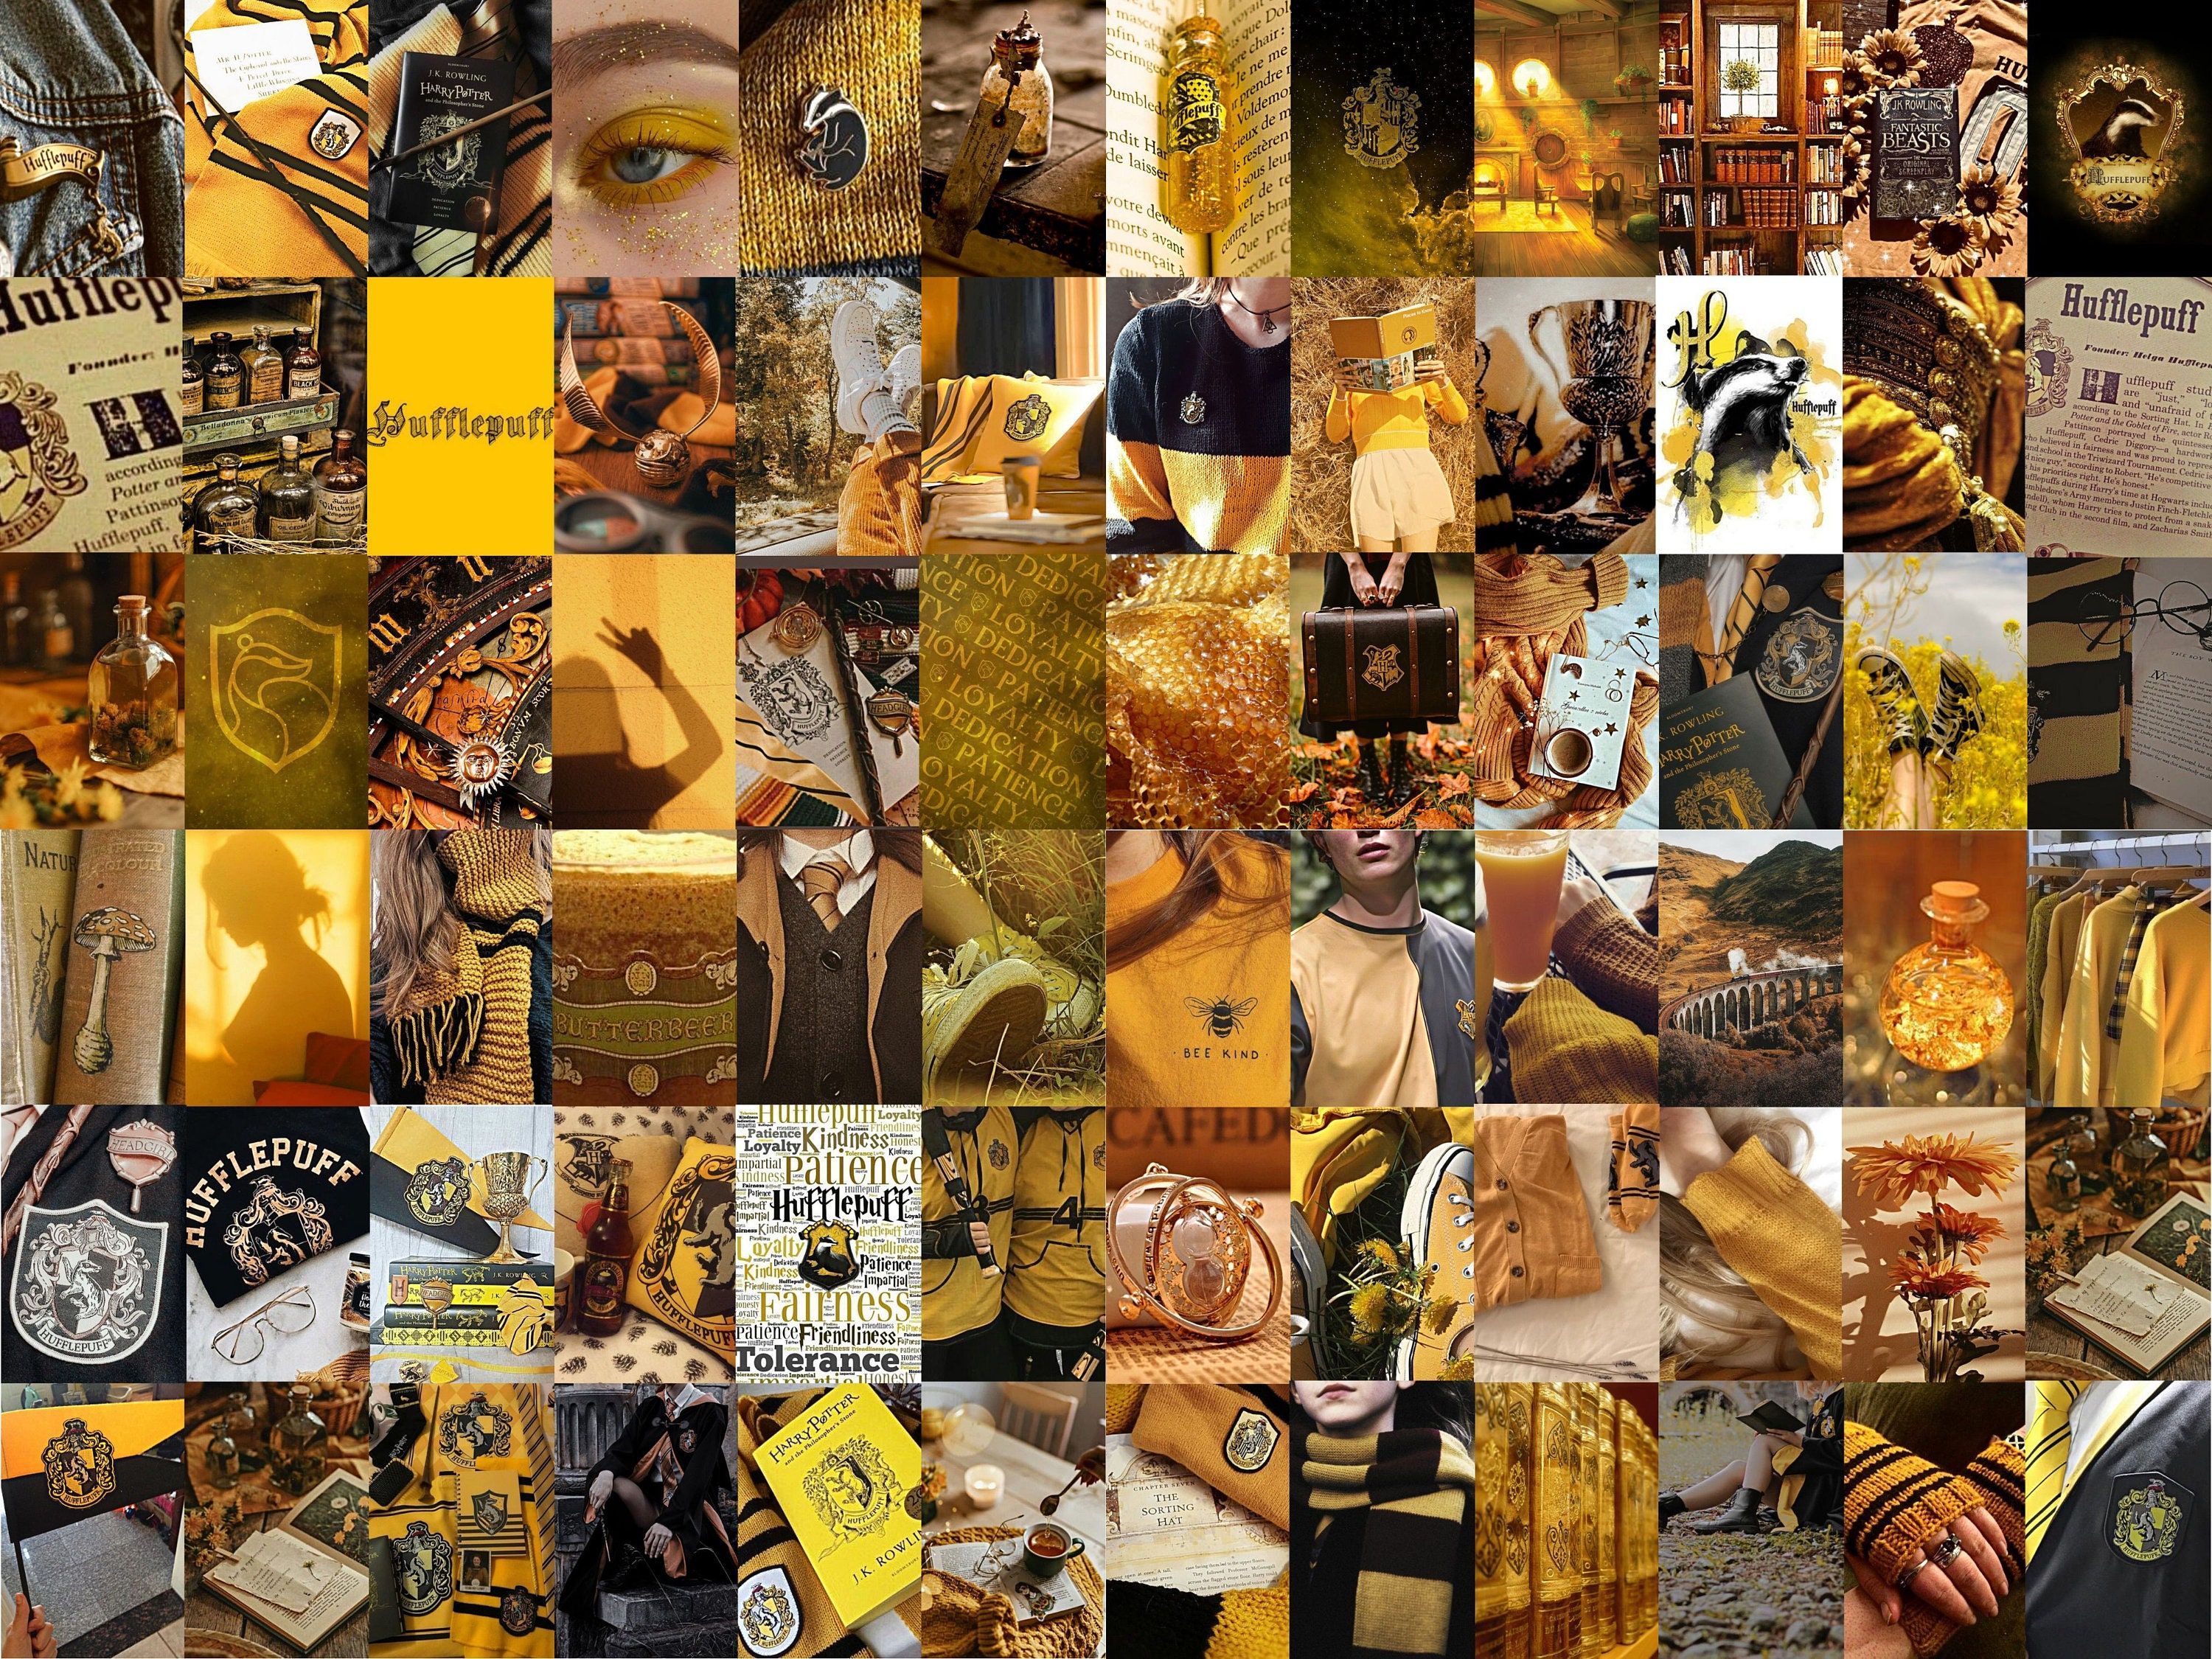 A collage of pictures in yellow and gold, representing the Hufflepuff house in Harry Potter. - Hufflepuff